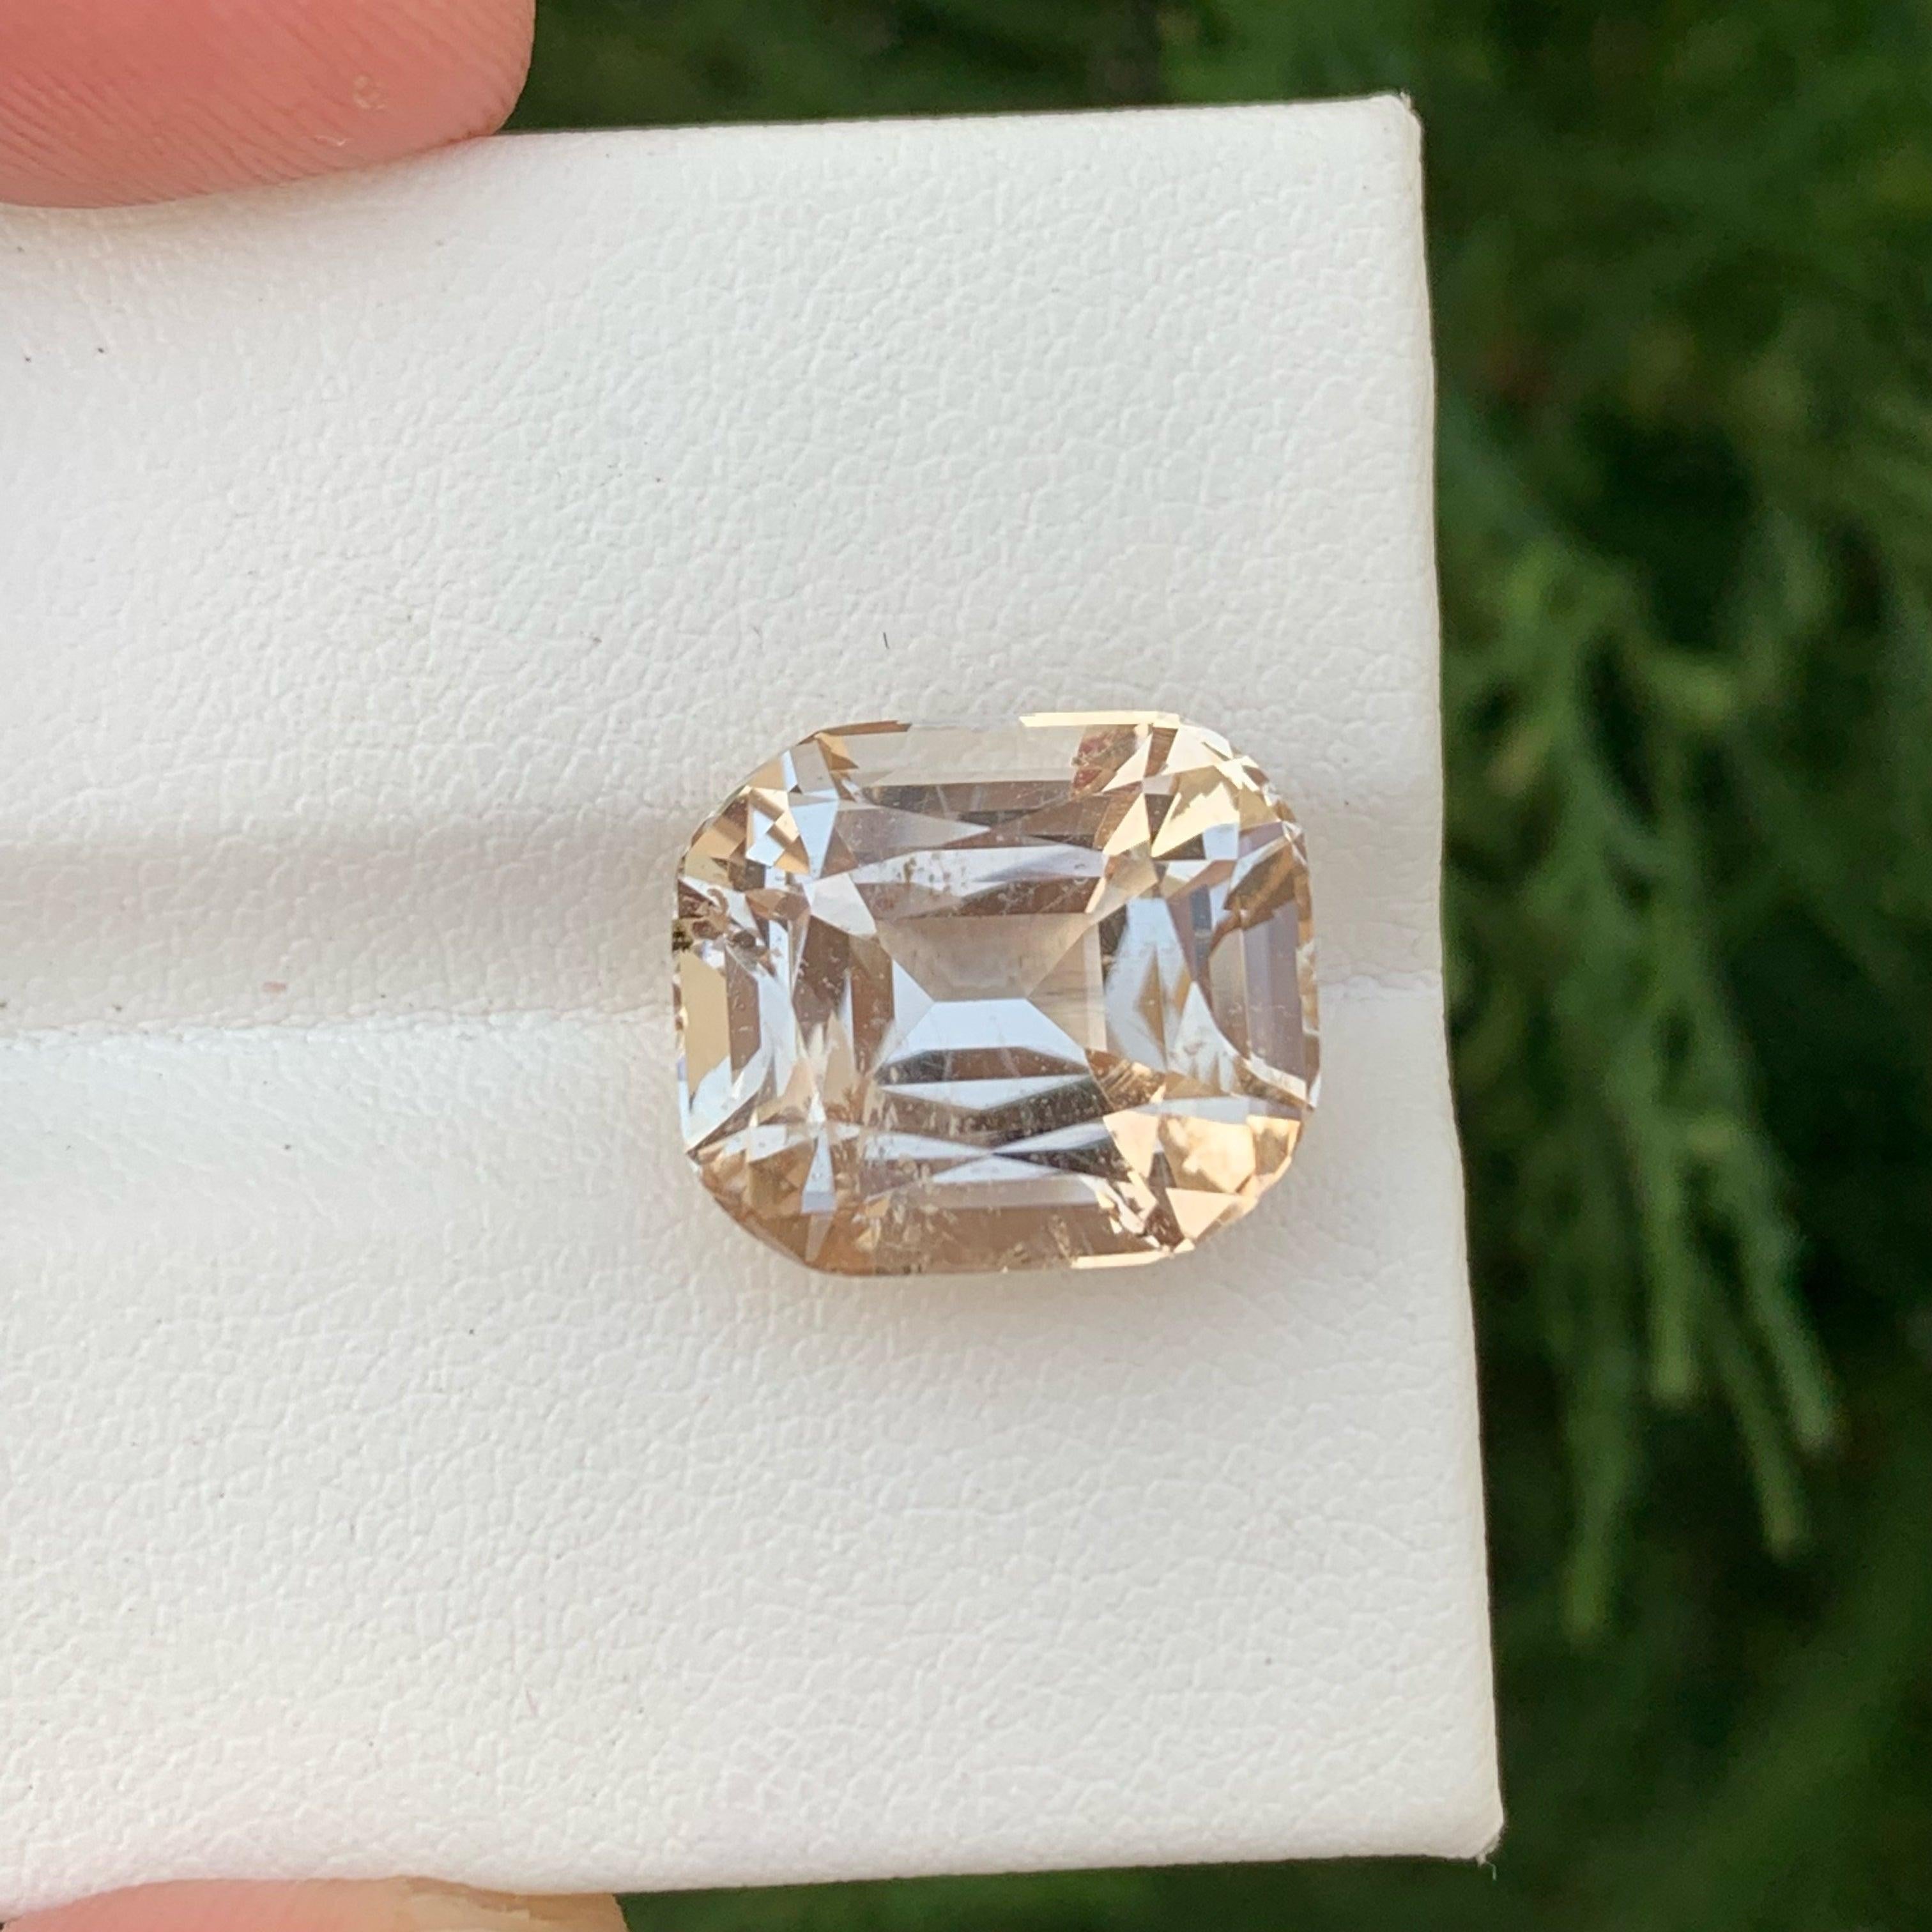 Imperial Step Cushion Cut Topaz Gemstone, available for sale at wholesale price natural high- quality 16.80 carats SI Clarity, Loose Topaz from Pakistan. 

Product Information:
GEMSTONE NAME: Imperial Step Cushion Cut Topaz Gemstone
WEIGHT:	16.80